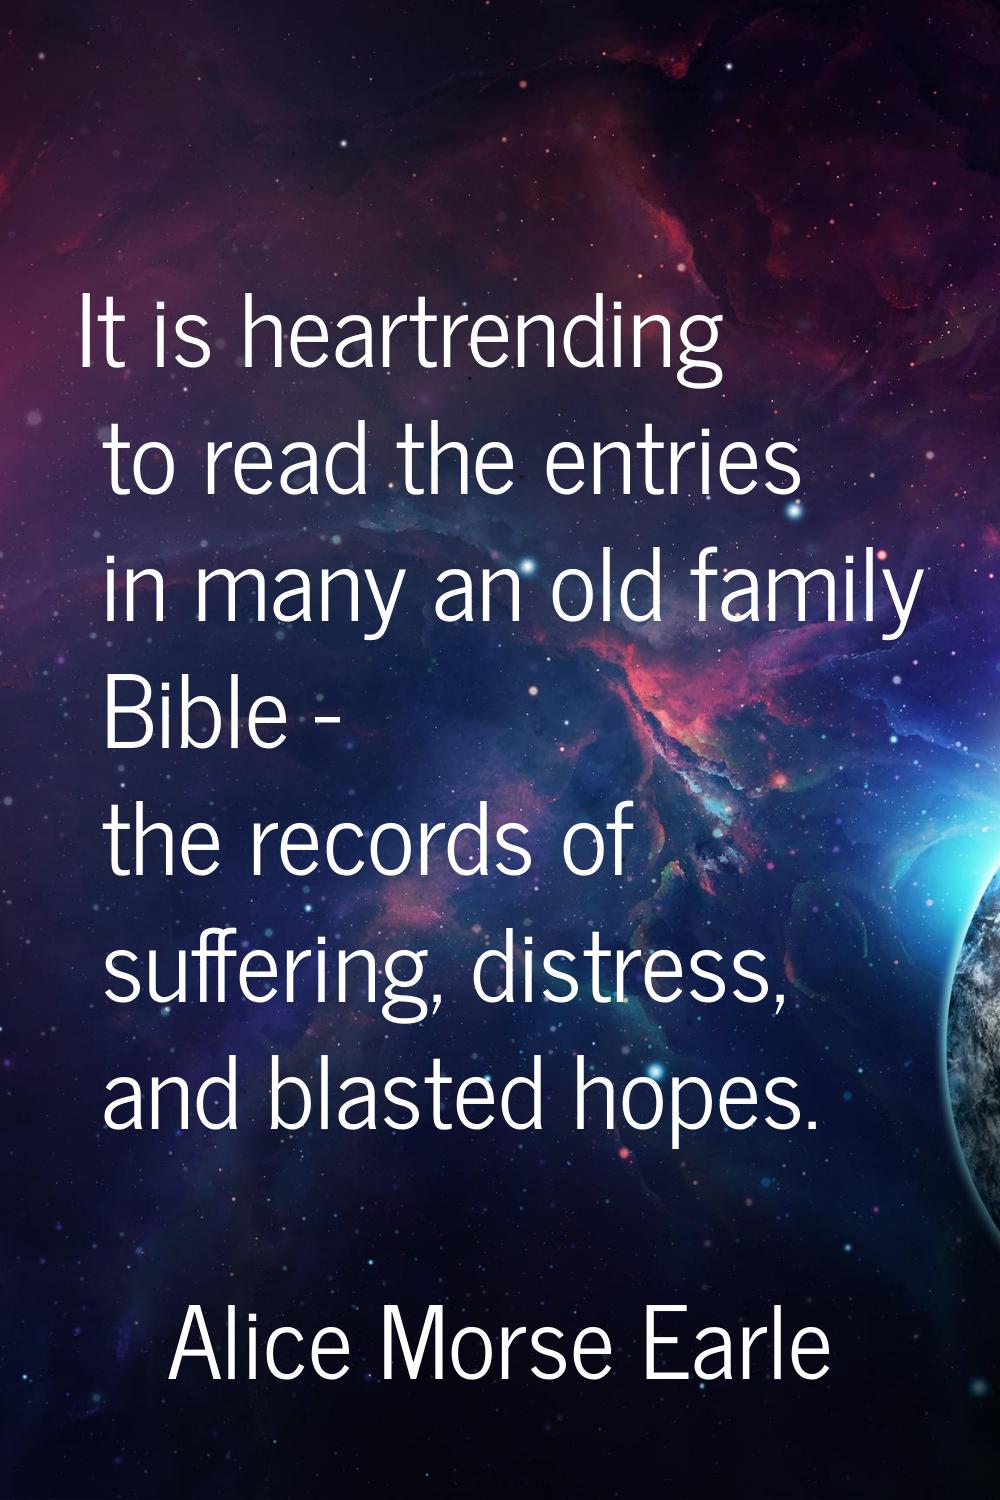 It is heartrending to read the entries in many an old family Bible - the records of suffering, dist